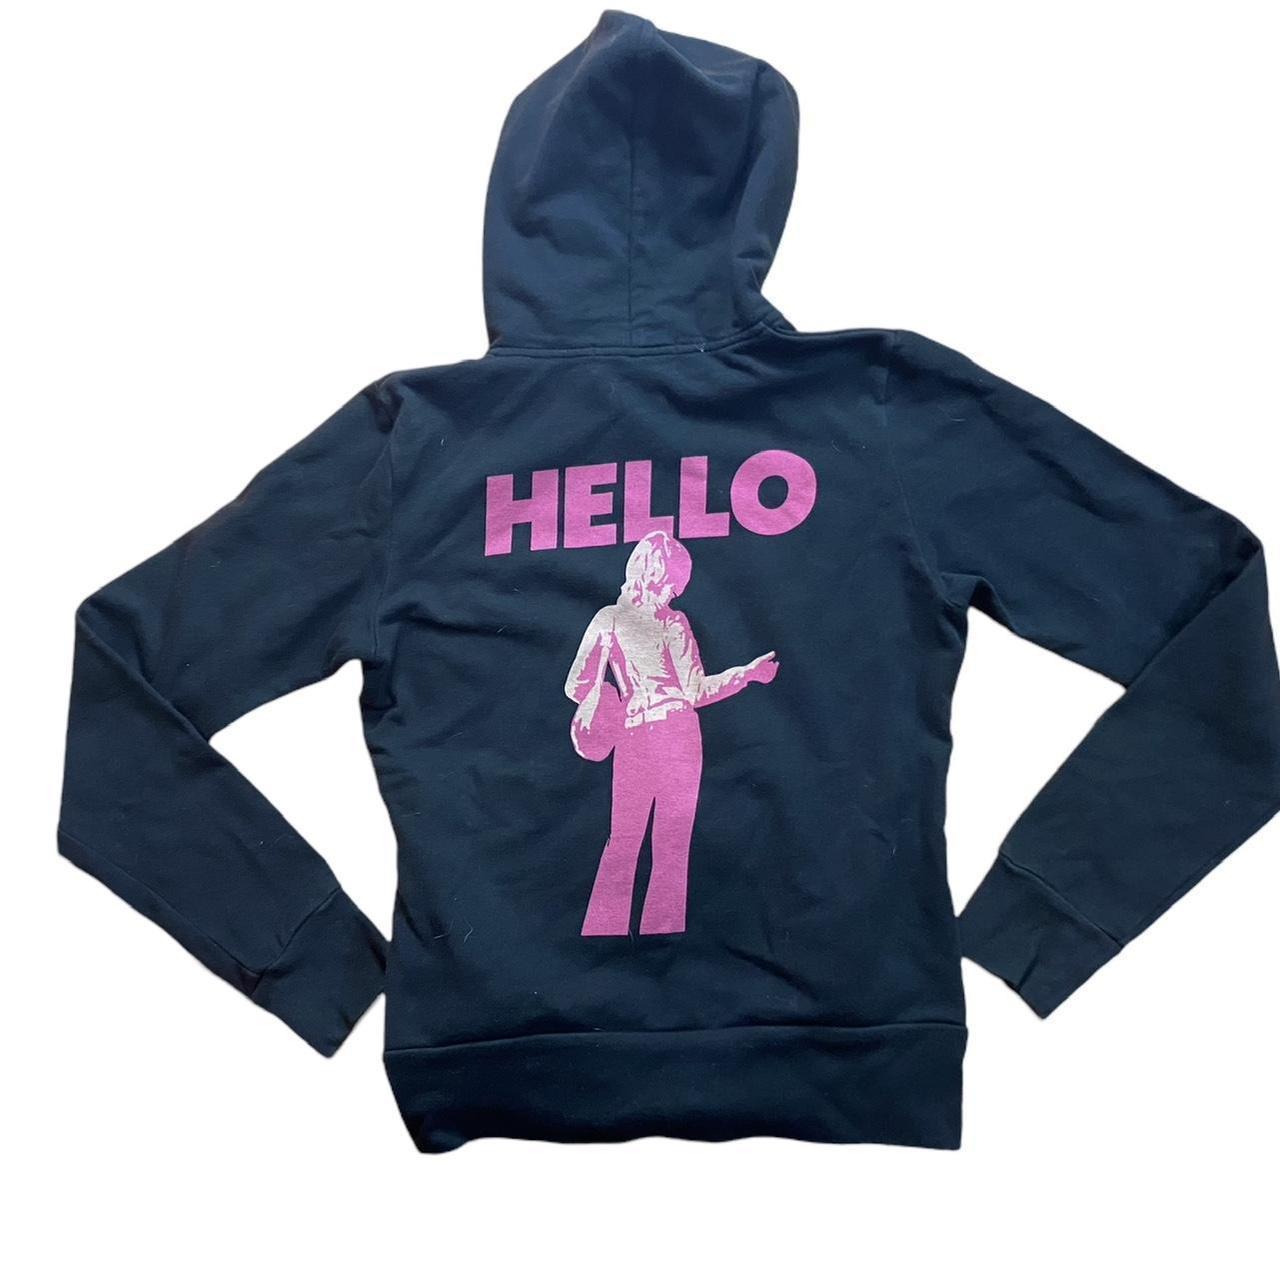 Hysteric Glamour hello goodbye 💞 double side hoodie.